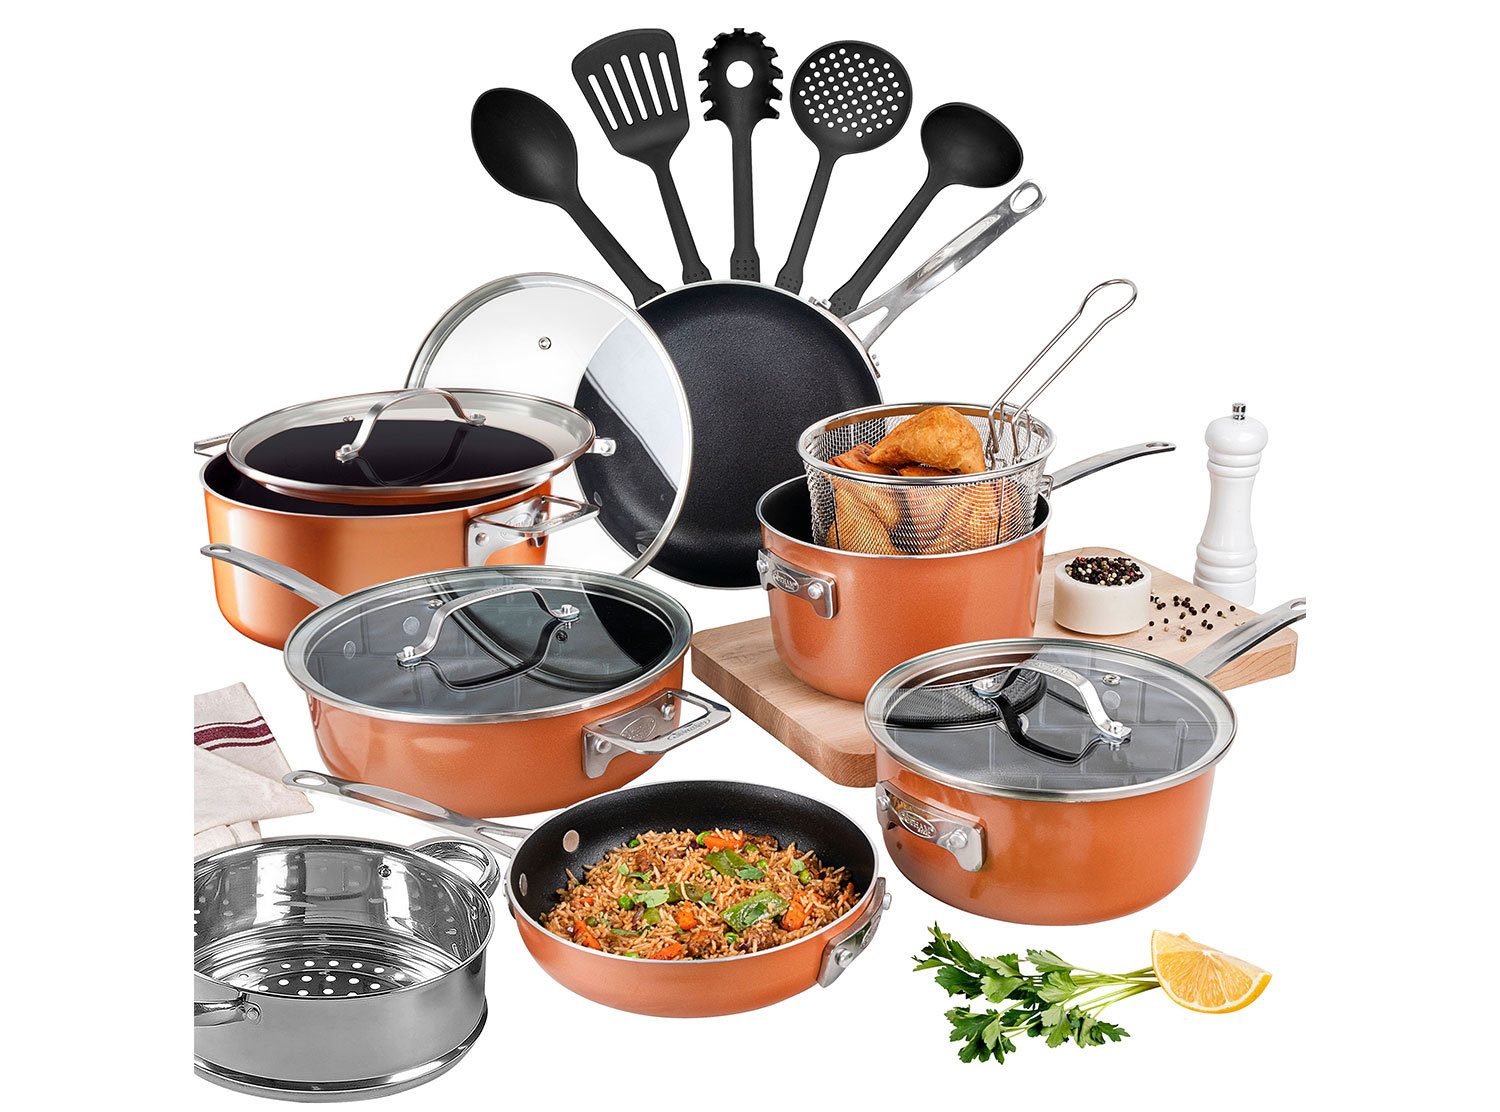 Gotham Steel Stackmaster Pots and Pans Set, 10 Piece Cookware Set,  Stackable Design with Nonstick Cast Texture Coating, Includes Skillets,  Sauce Pans, Stock Pots and Utensils, Dishwasher Safe, Black 